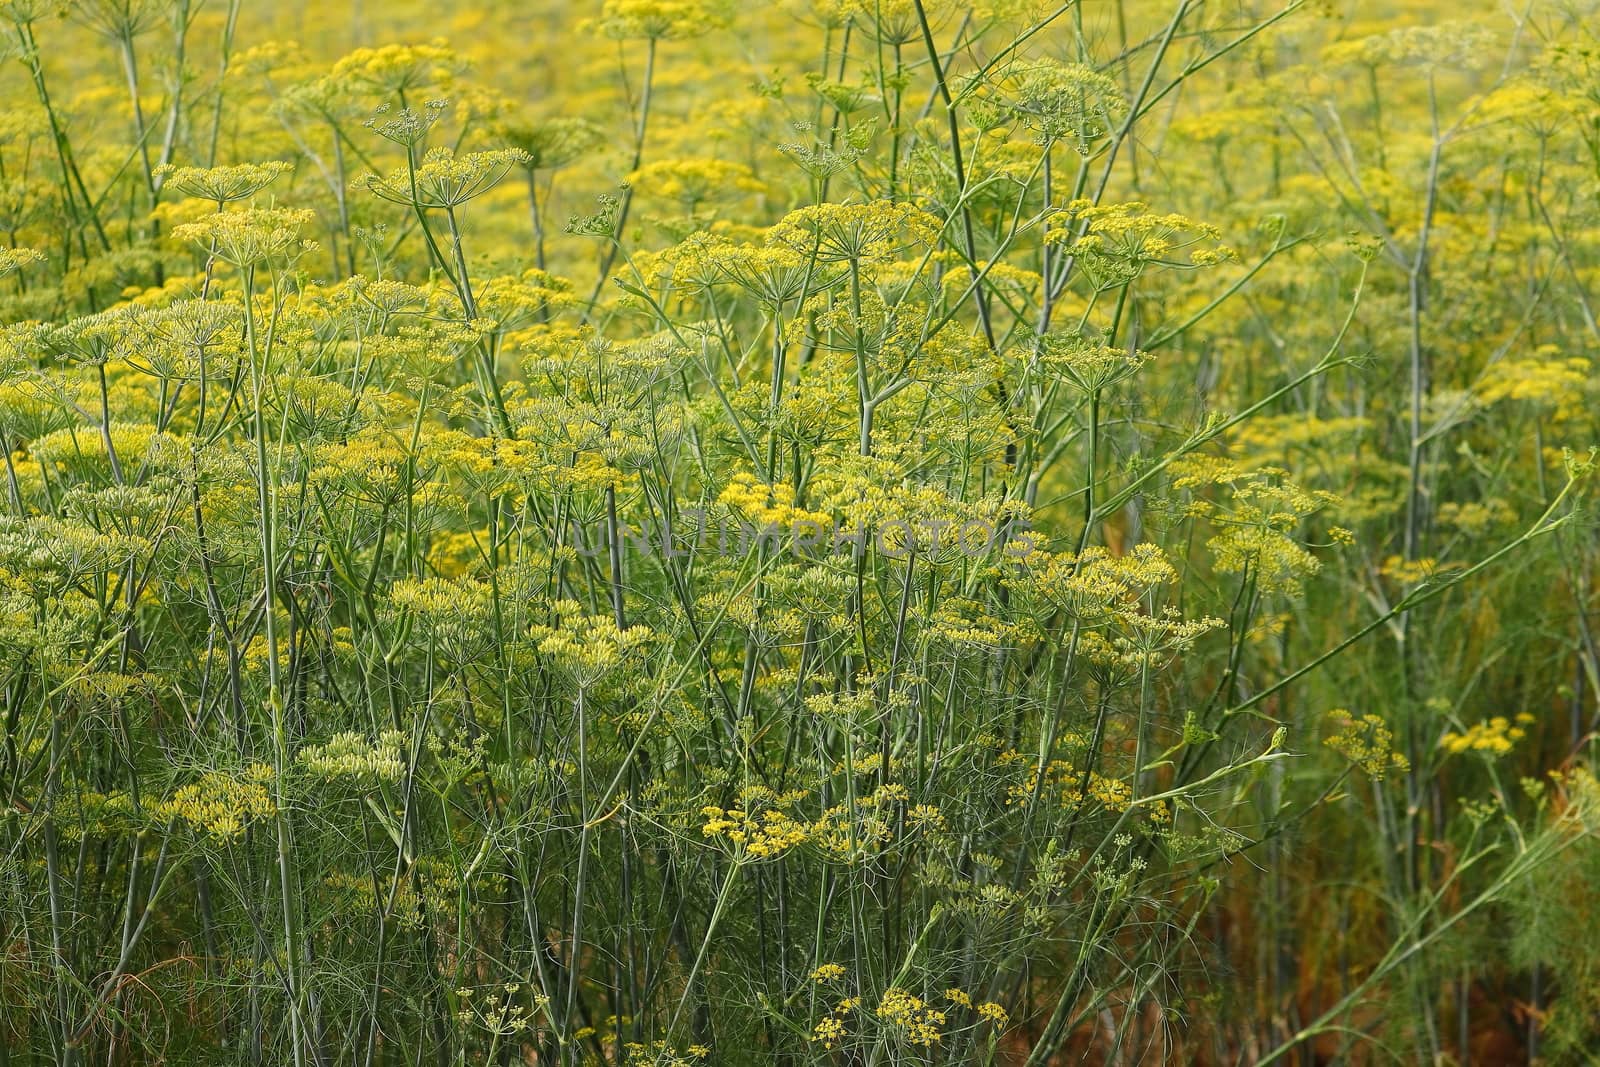 yellow green flowers of organic fennel (dill) plants in the agriculture field , INDIA Rajasthan